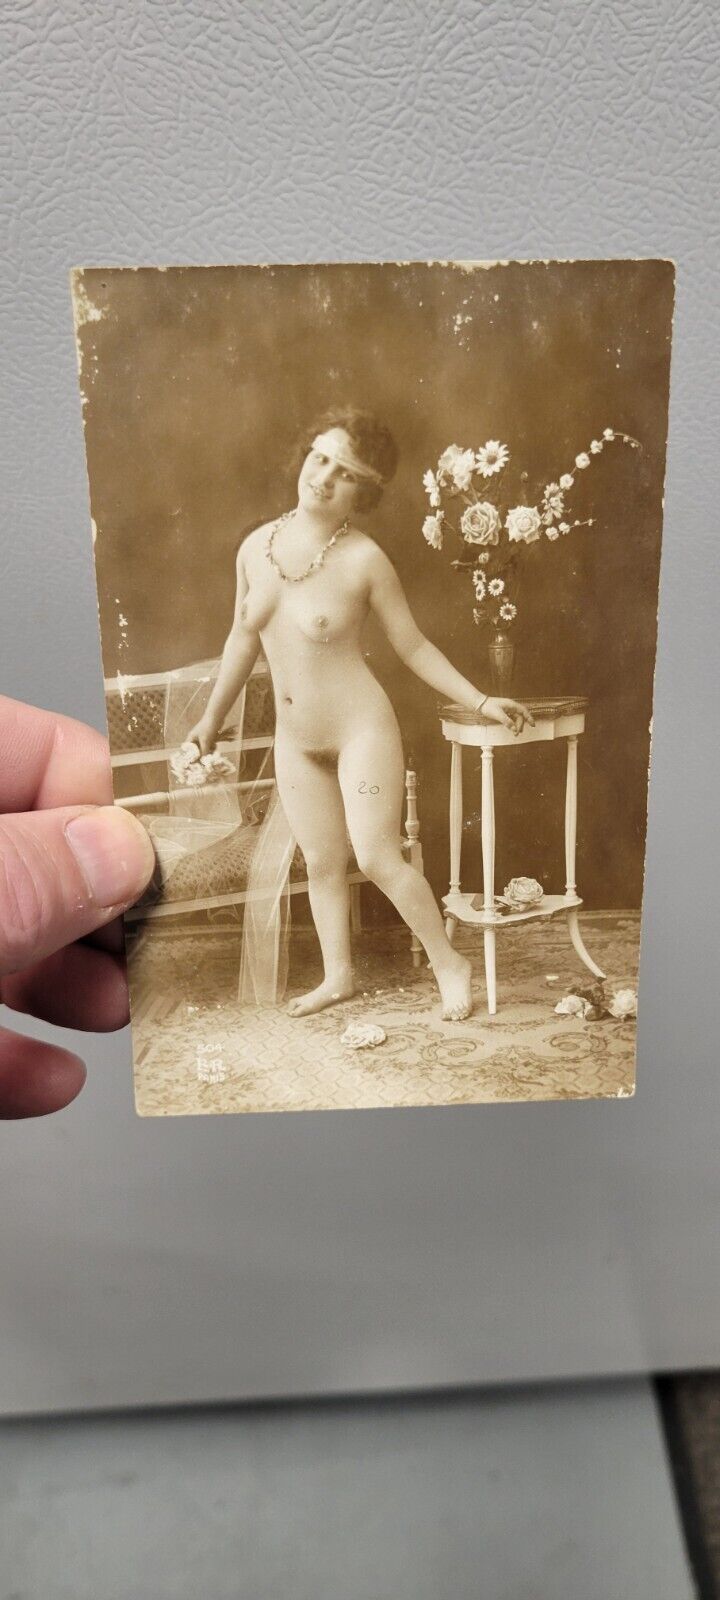 Old Vintage Original 1910 Nude Female French Photo Postcard Photograph